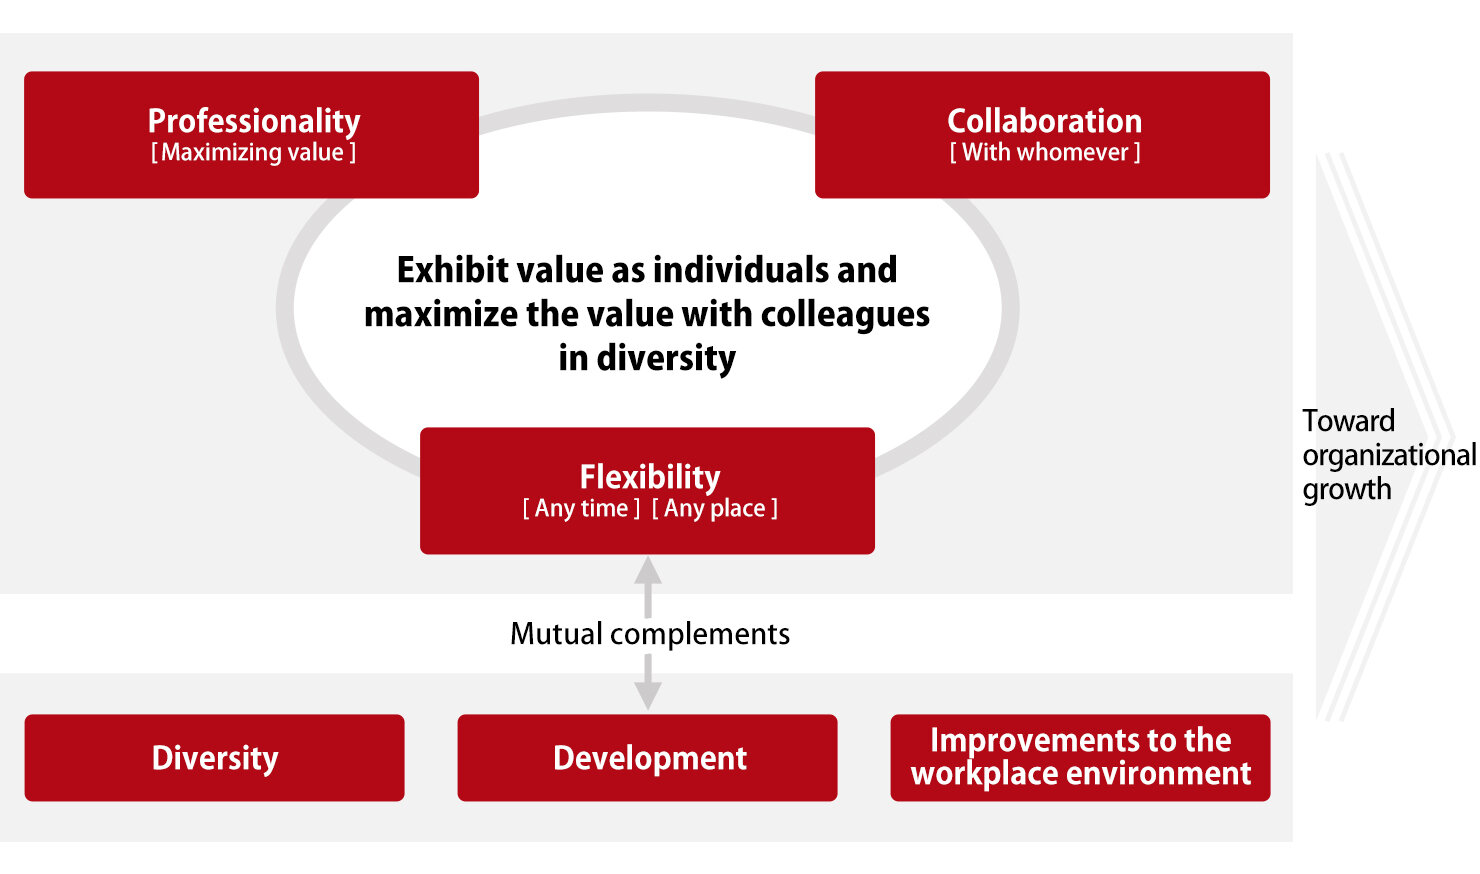 Exhibit value as individuals and maximize the value with colleague in diversity